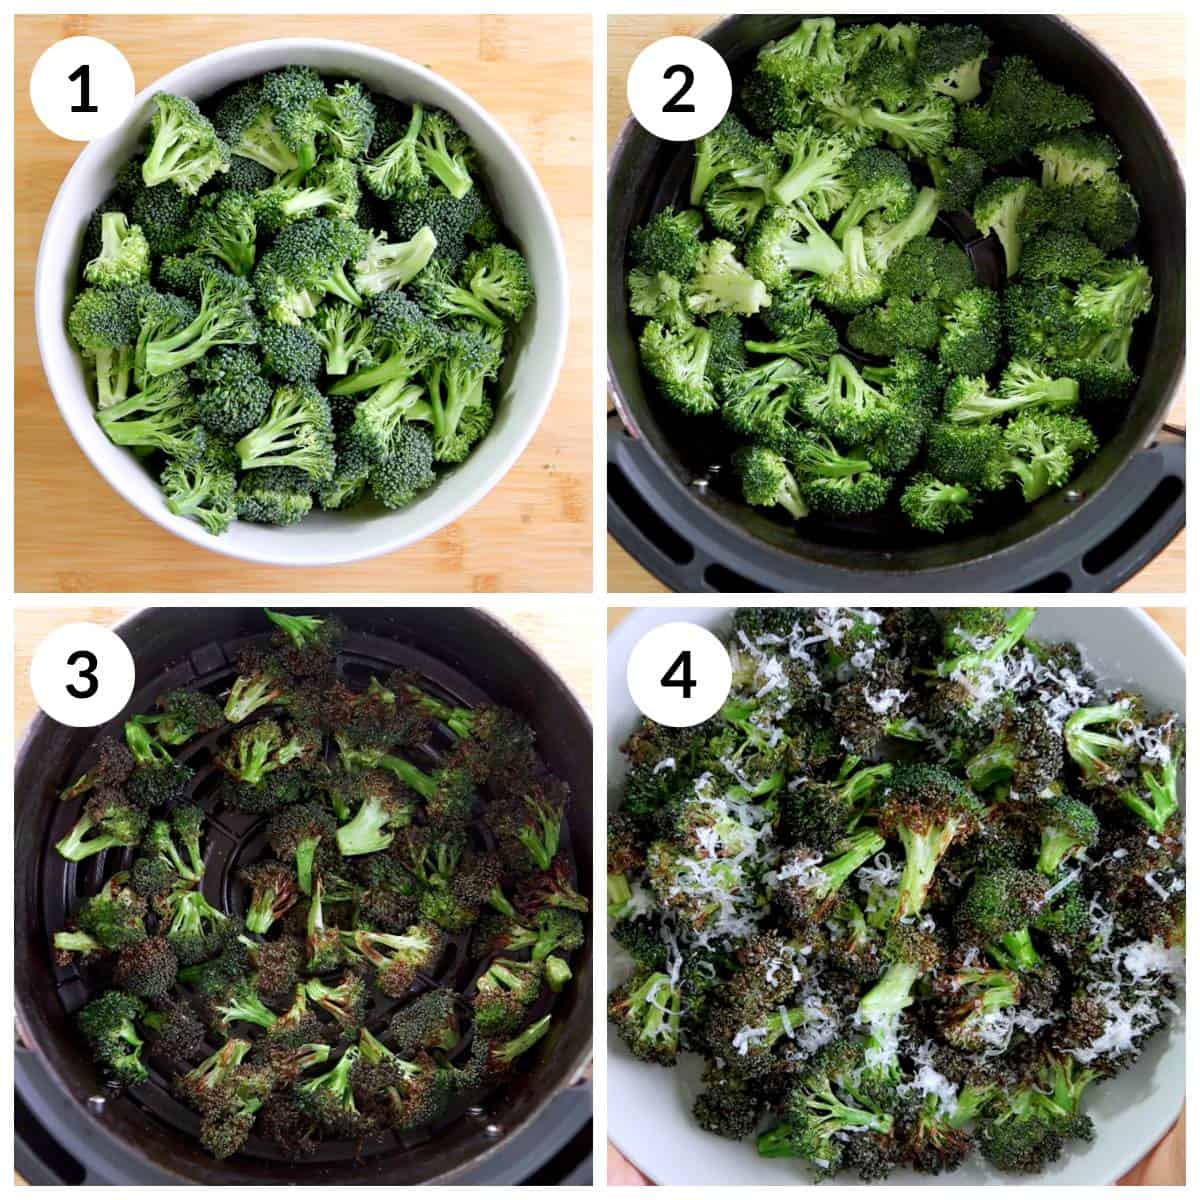 Steps showing how to make roasted broccoli in an air fryer